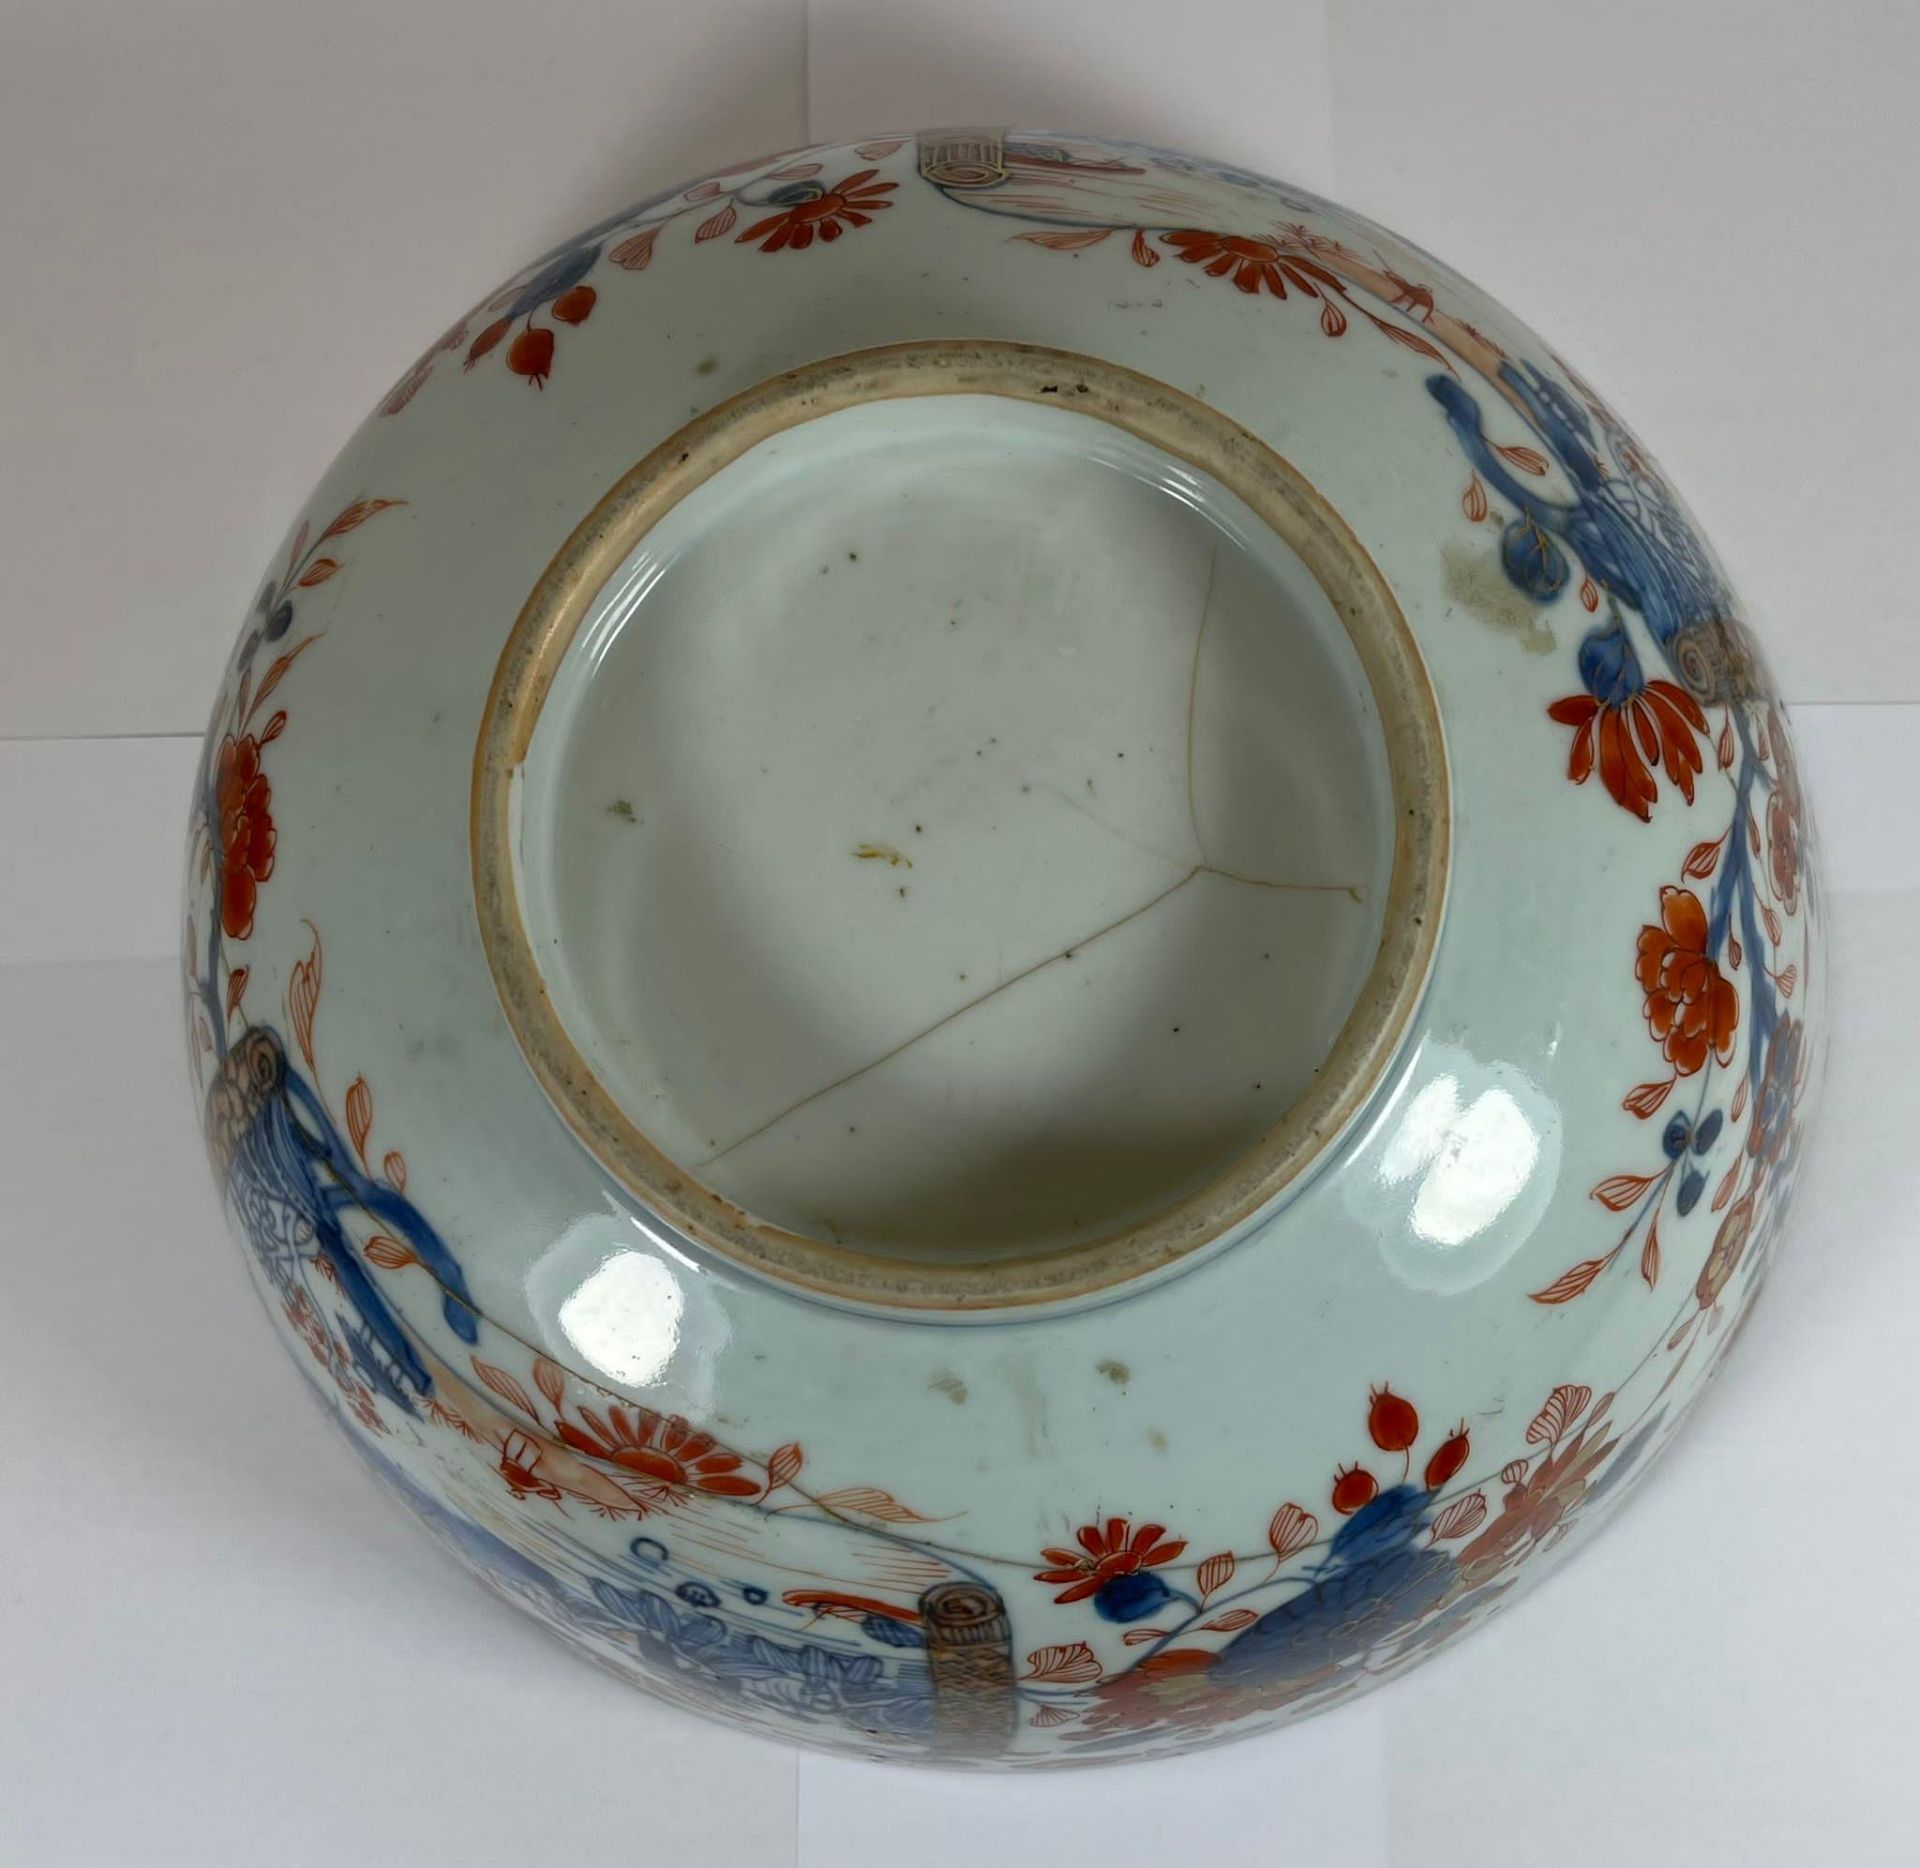 AN 18TH CENTURY CHINESE EXPORT PORCELAIN FRUIT BOWL WITH FLORAL DESIGN, DIAMETER 23CM, HEIGHT 11CM - Image 2 of 6